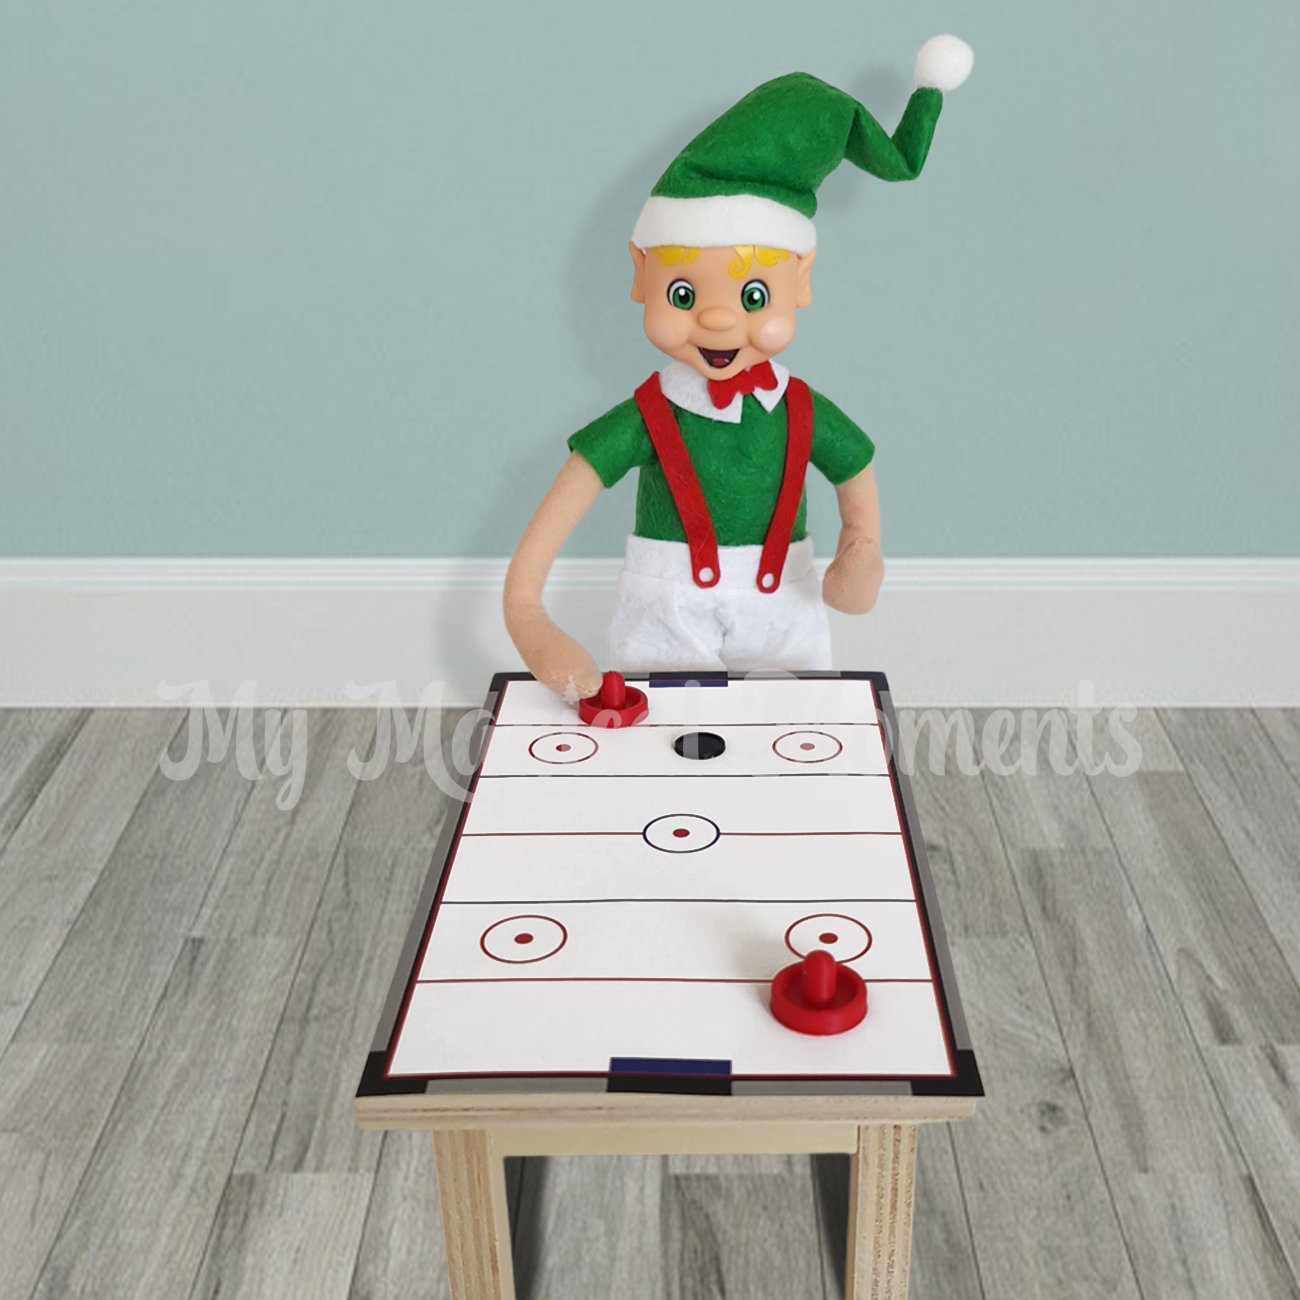 Blonde hair elf playing air hockey on a table with red pushes and a puck